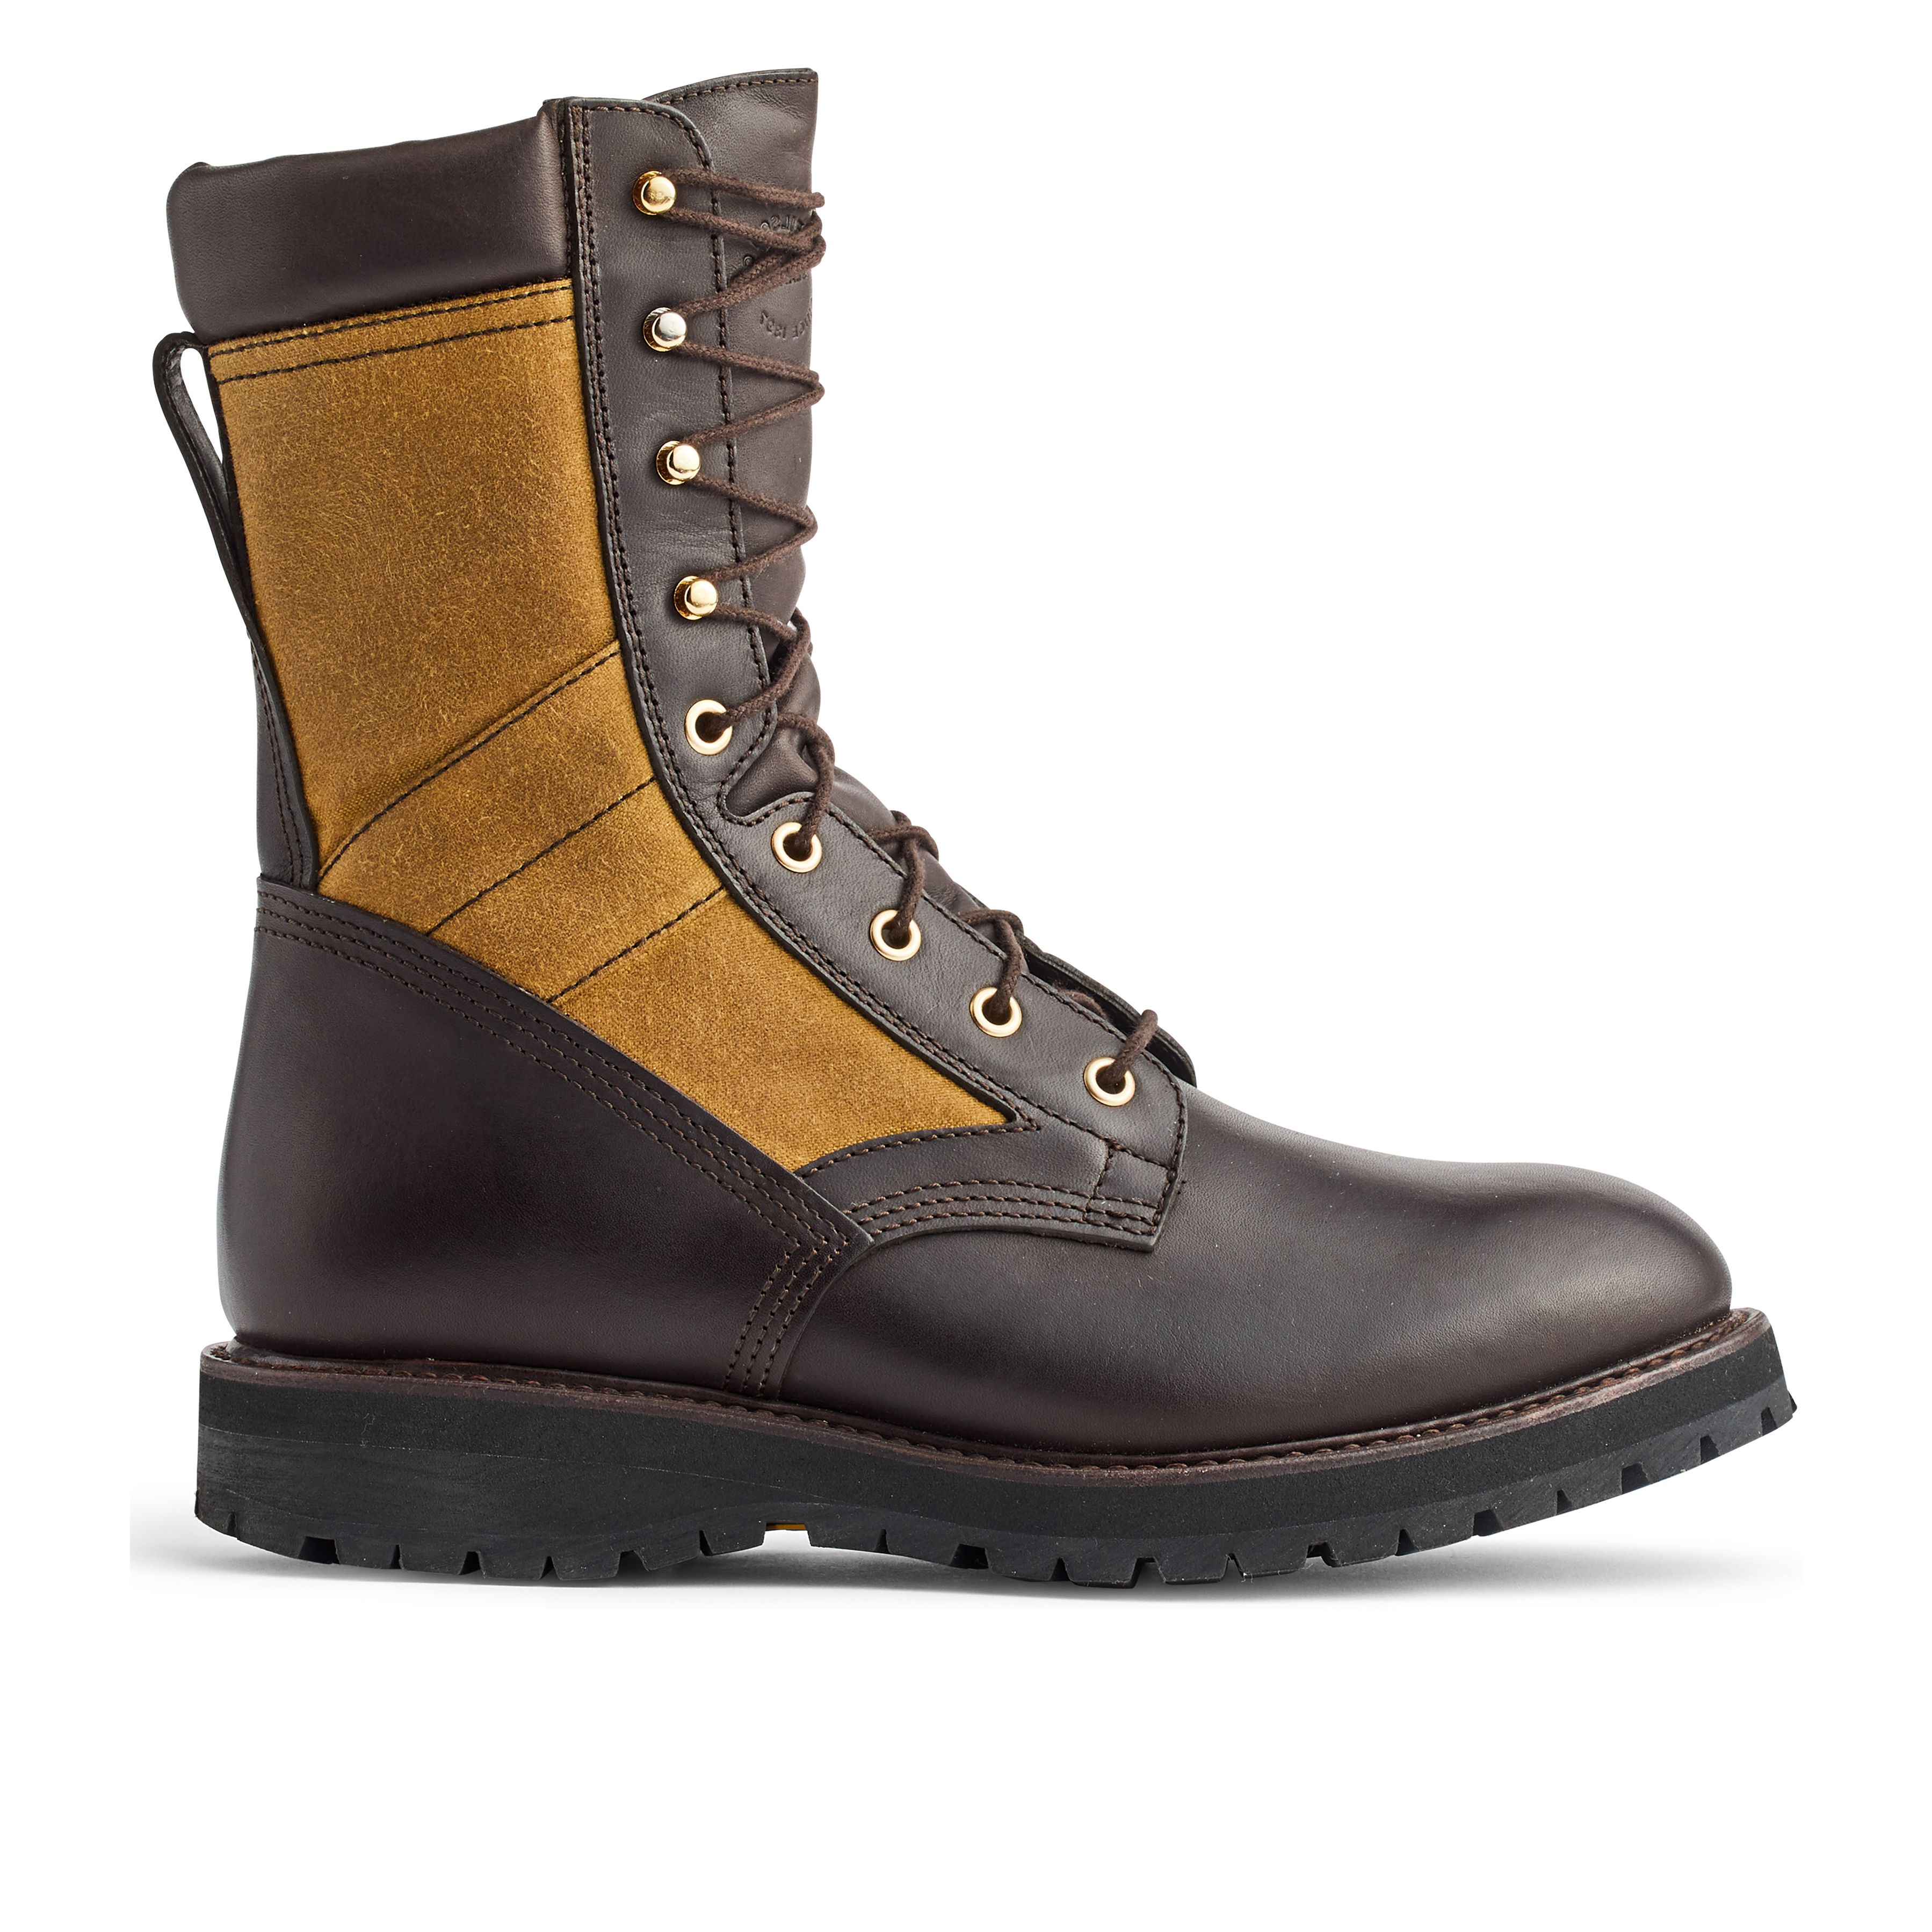 cyber monday deals on work boots